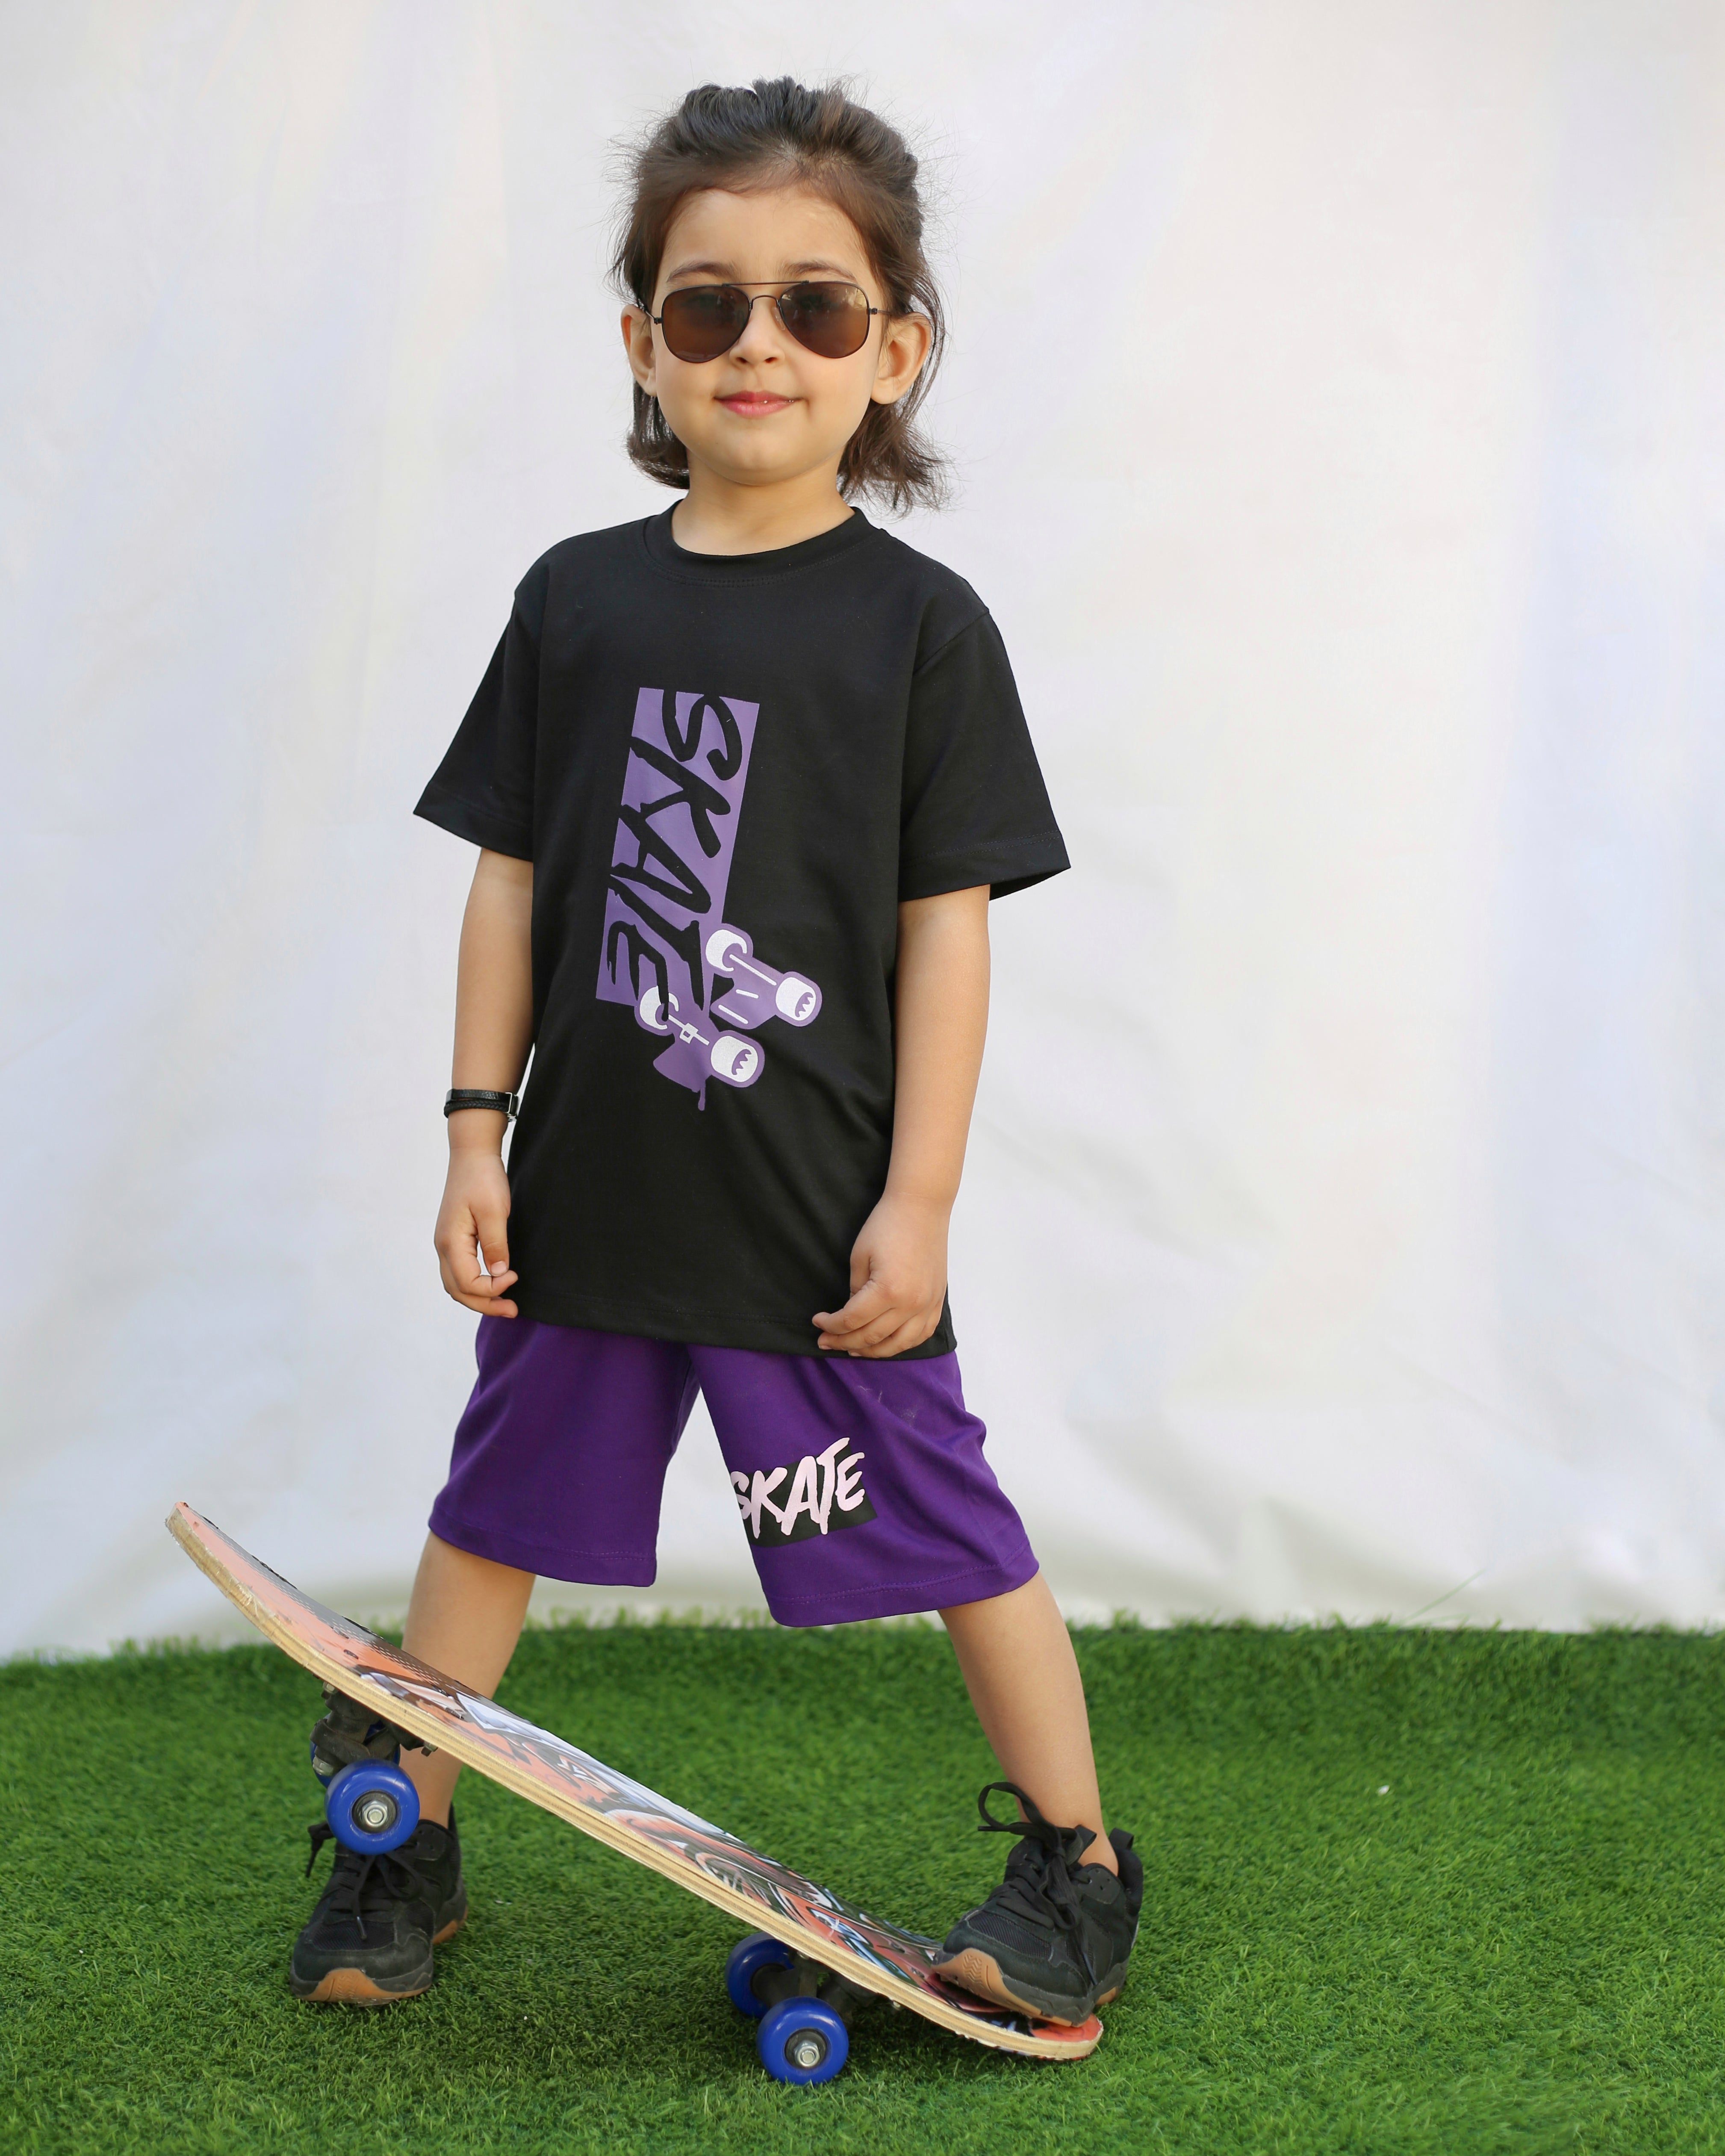 Skate Purple T-Shirt And Shorts For Kids